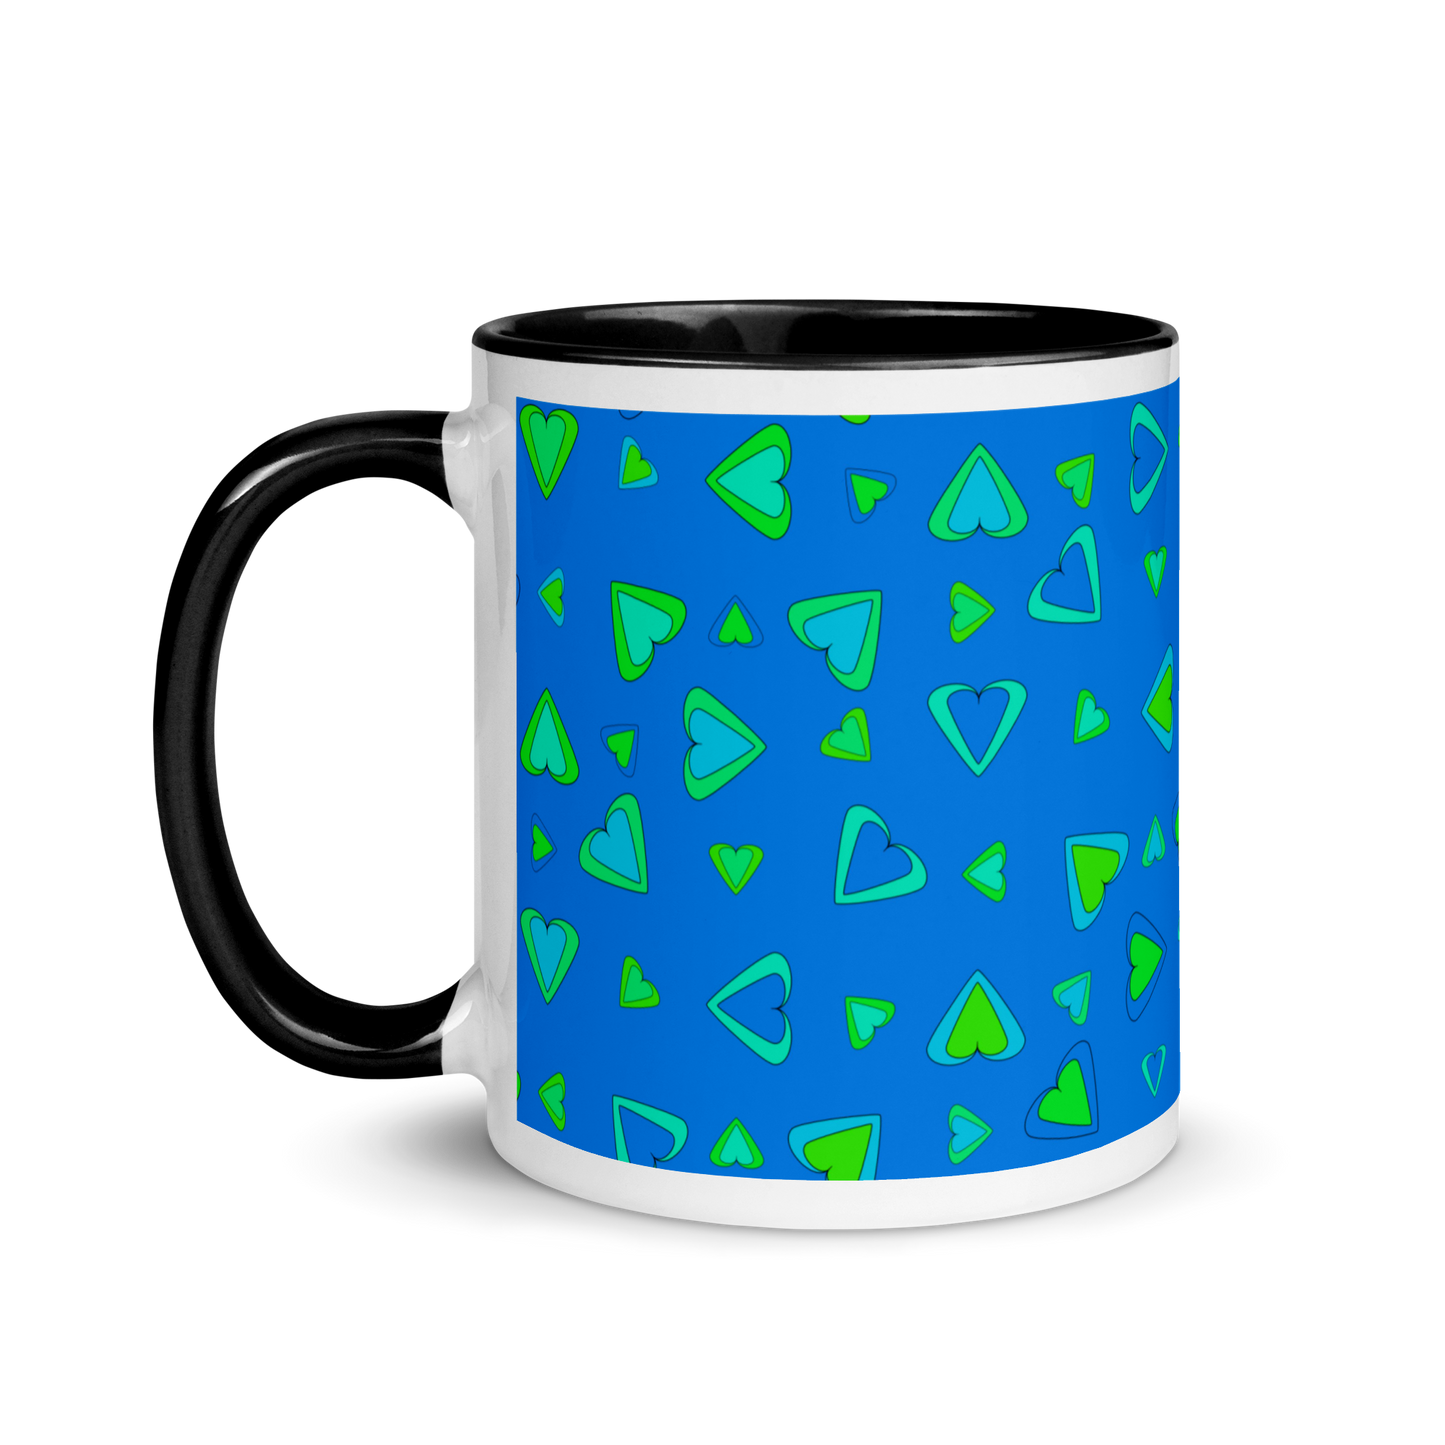 Rainbow Of Hearts | Batch 01 | Seamless Patterns | White Ceramic Mug with Color Inside - #6